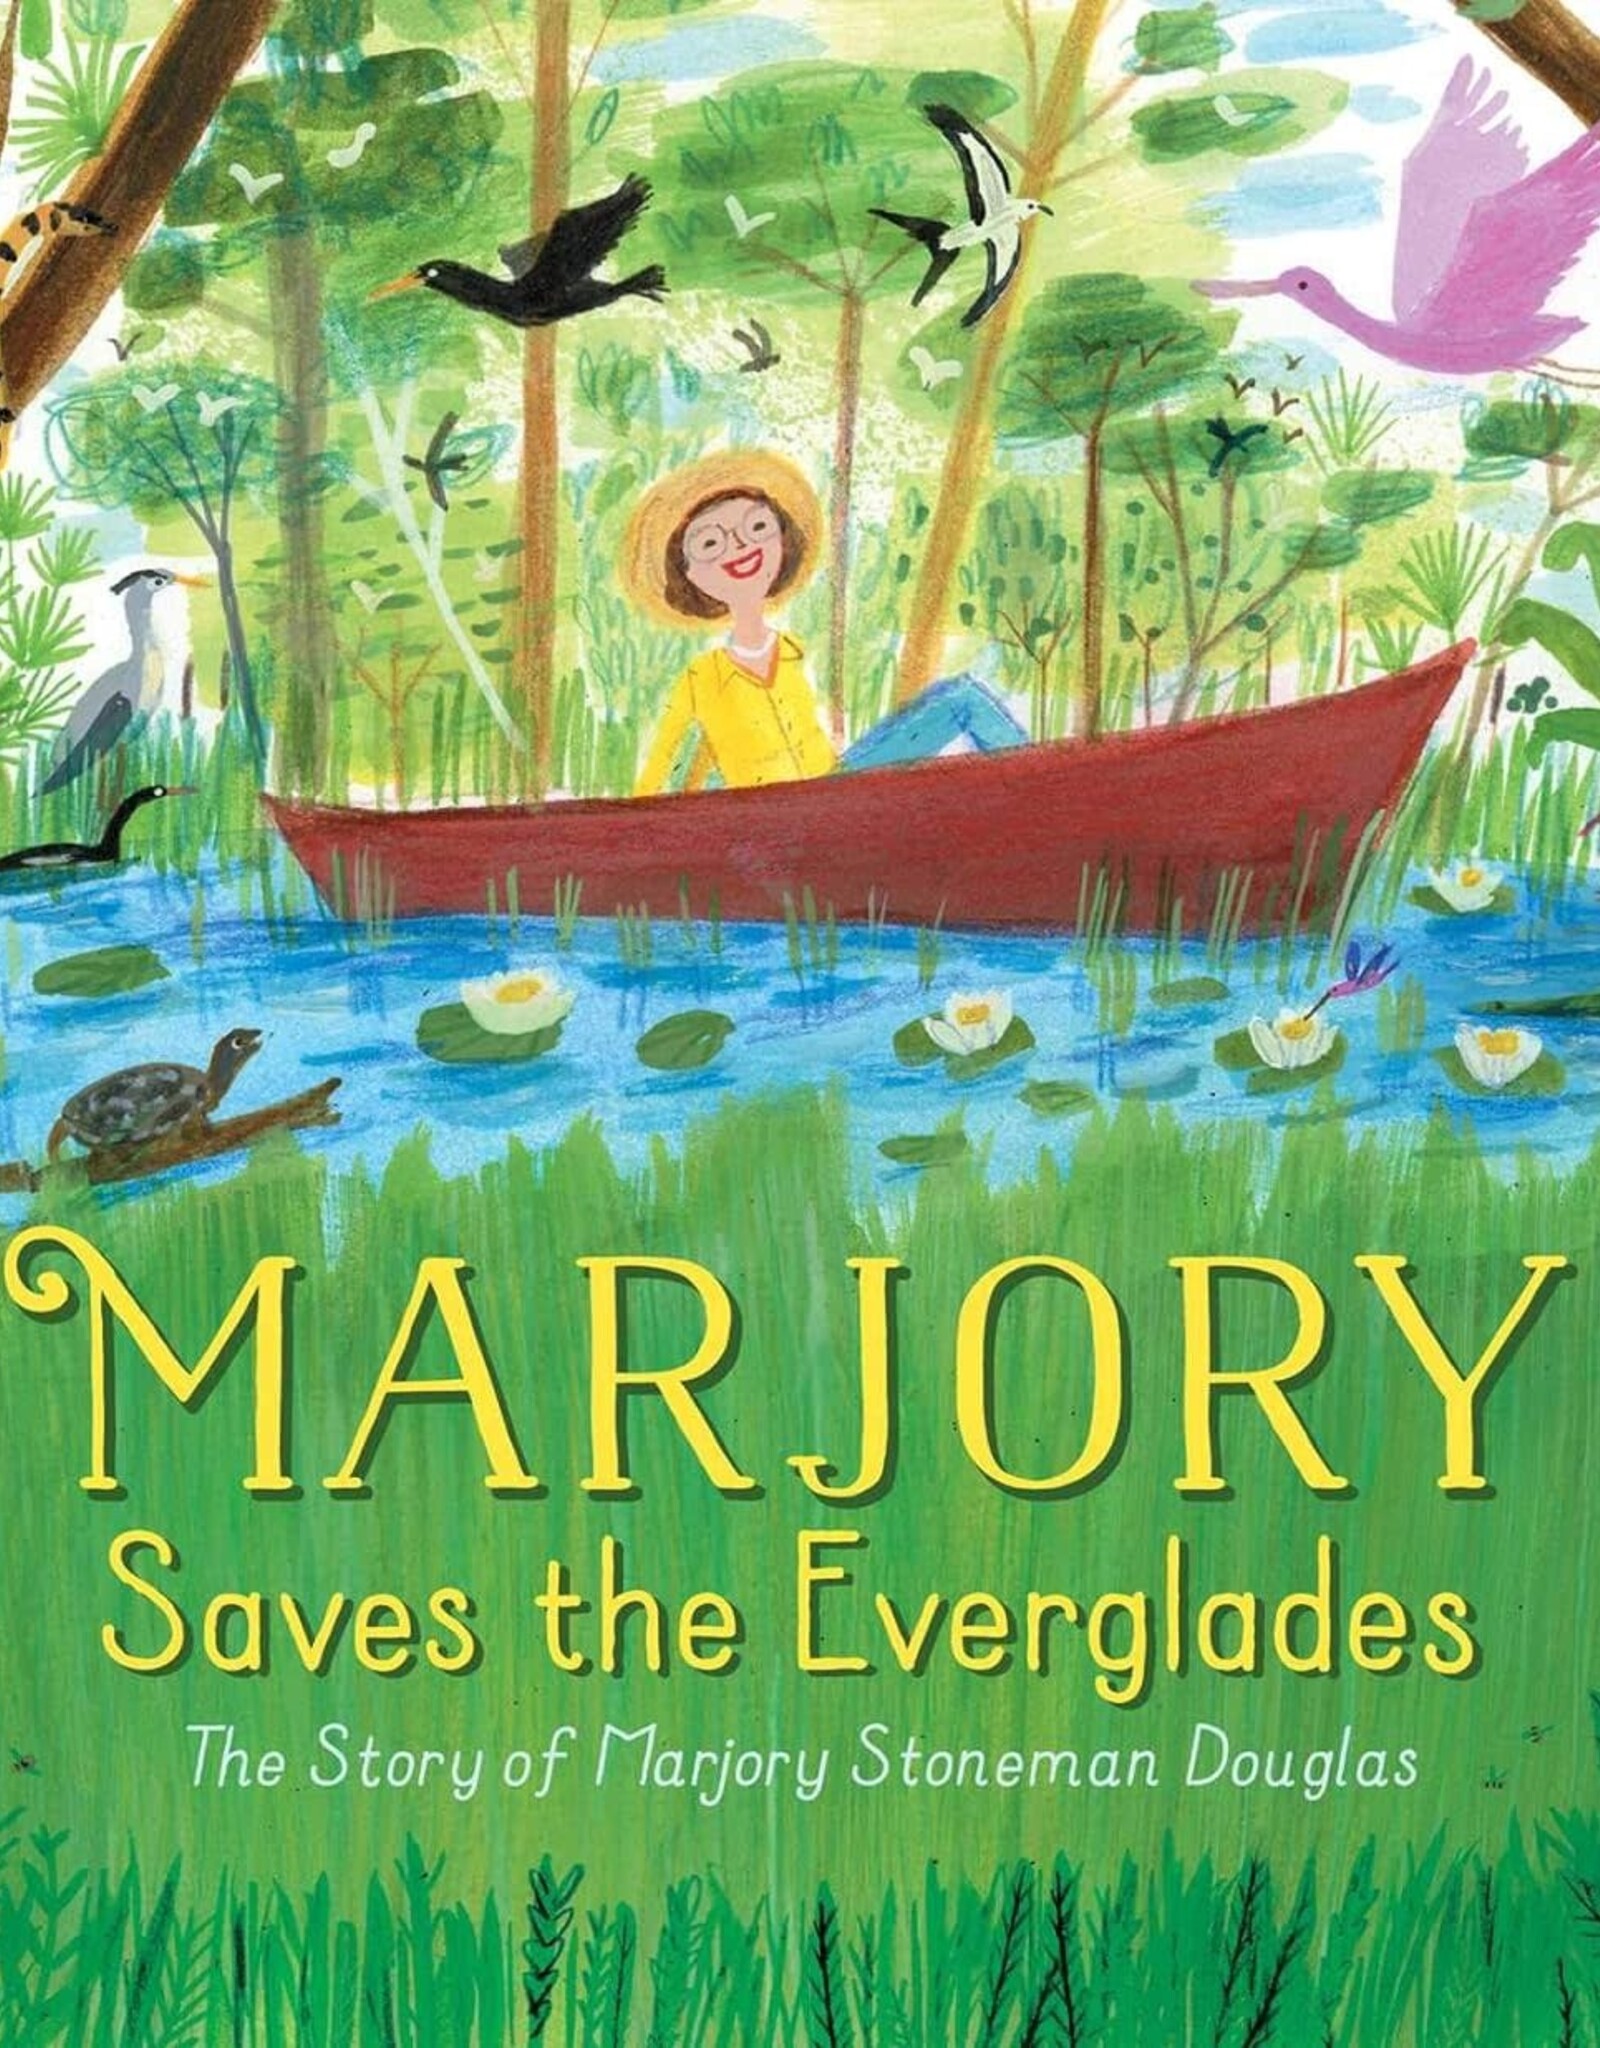 Book  - Majory Saves the Everglades